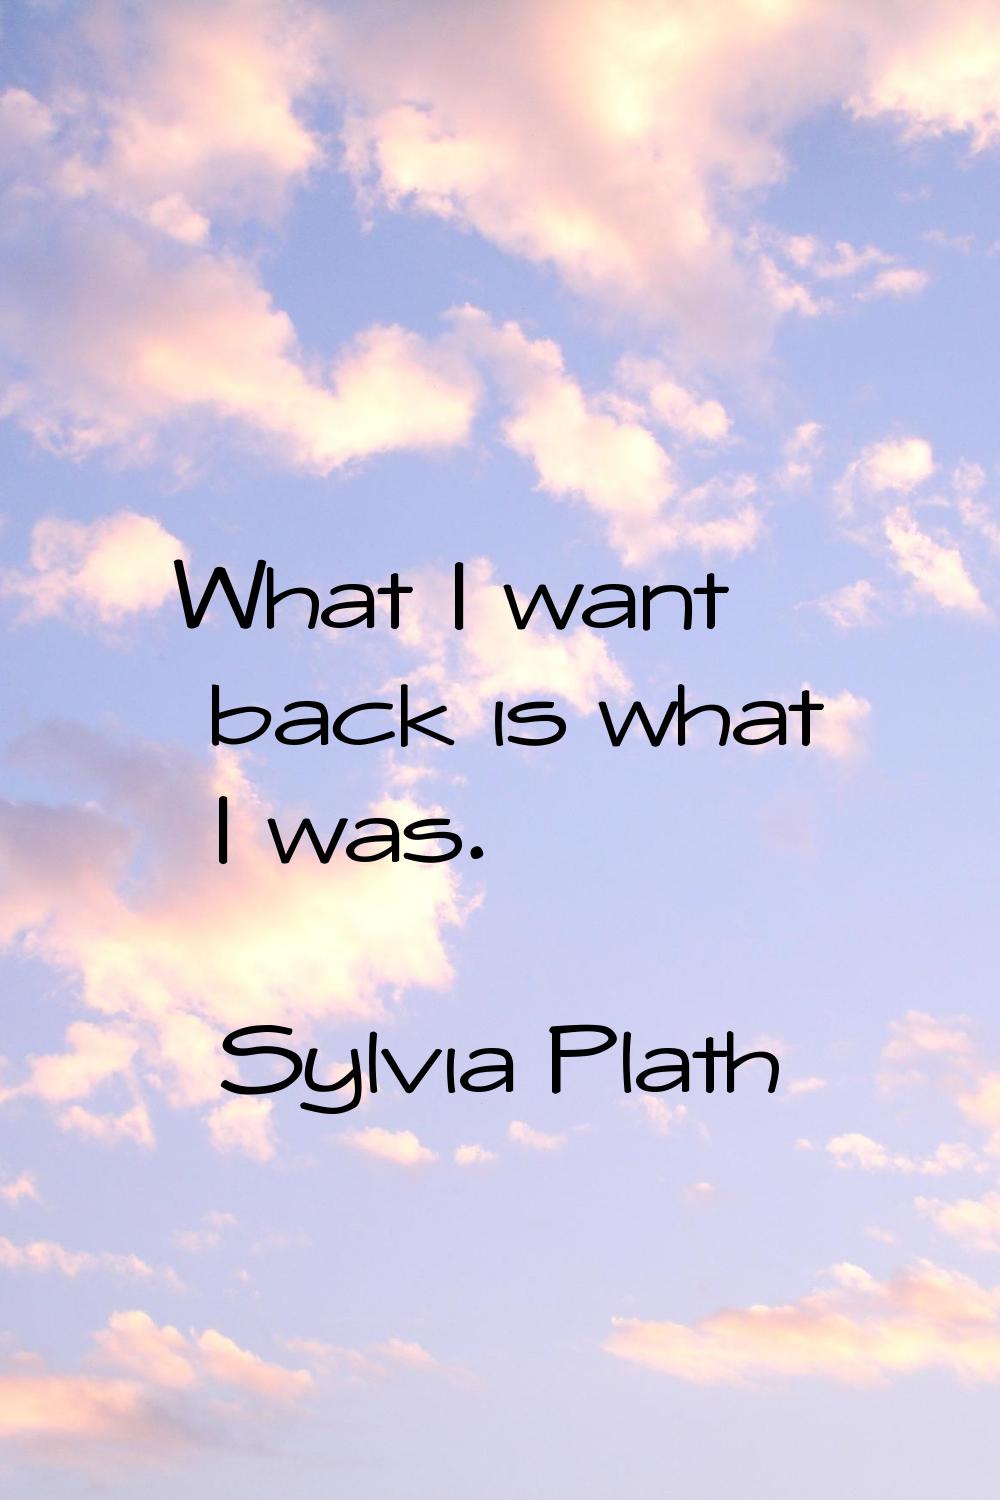 What I want back is what I was.